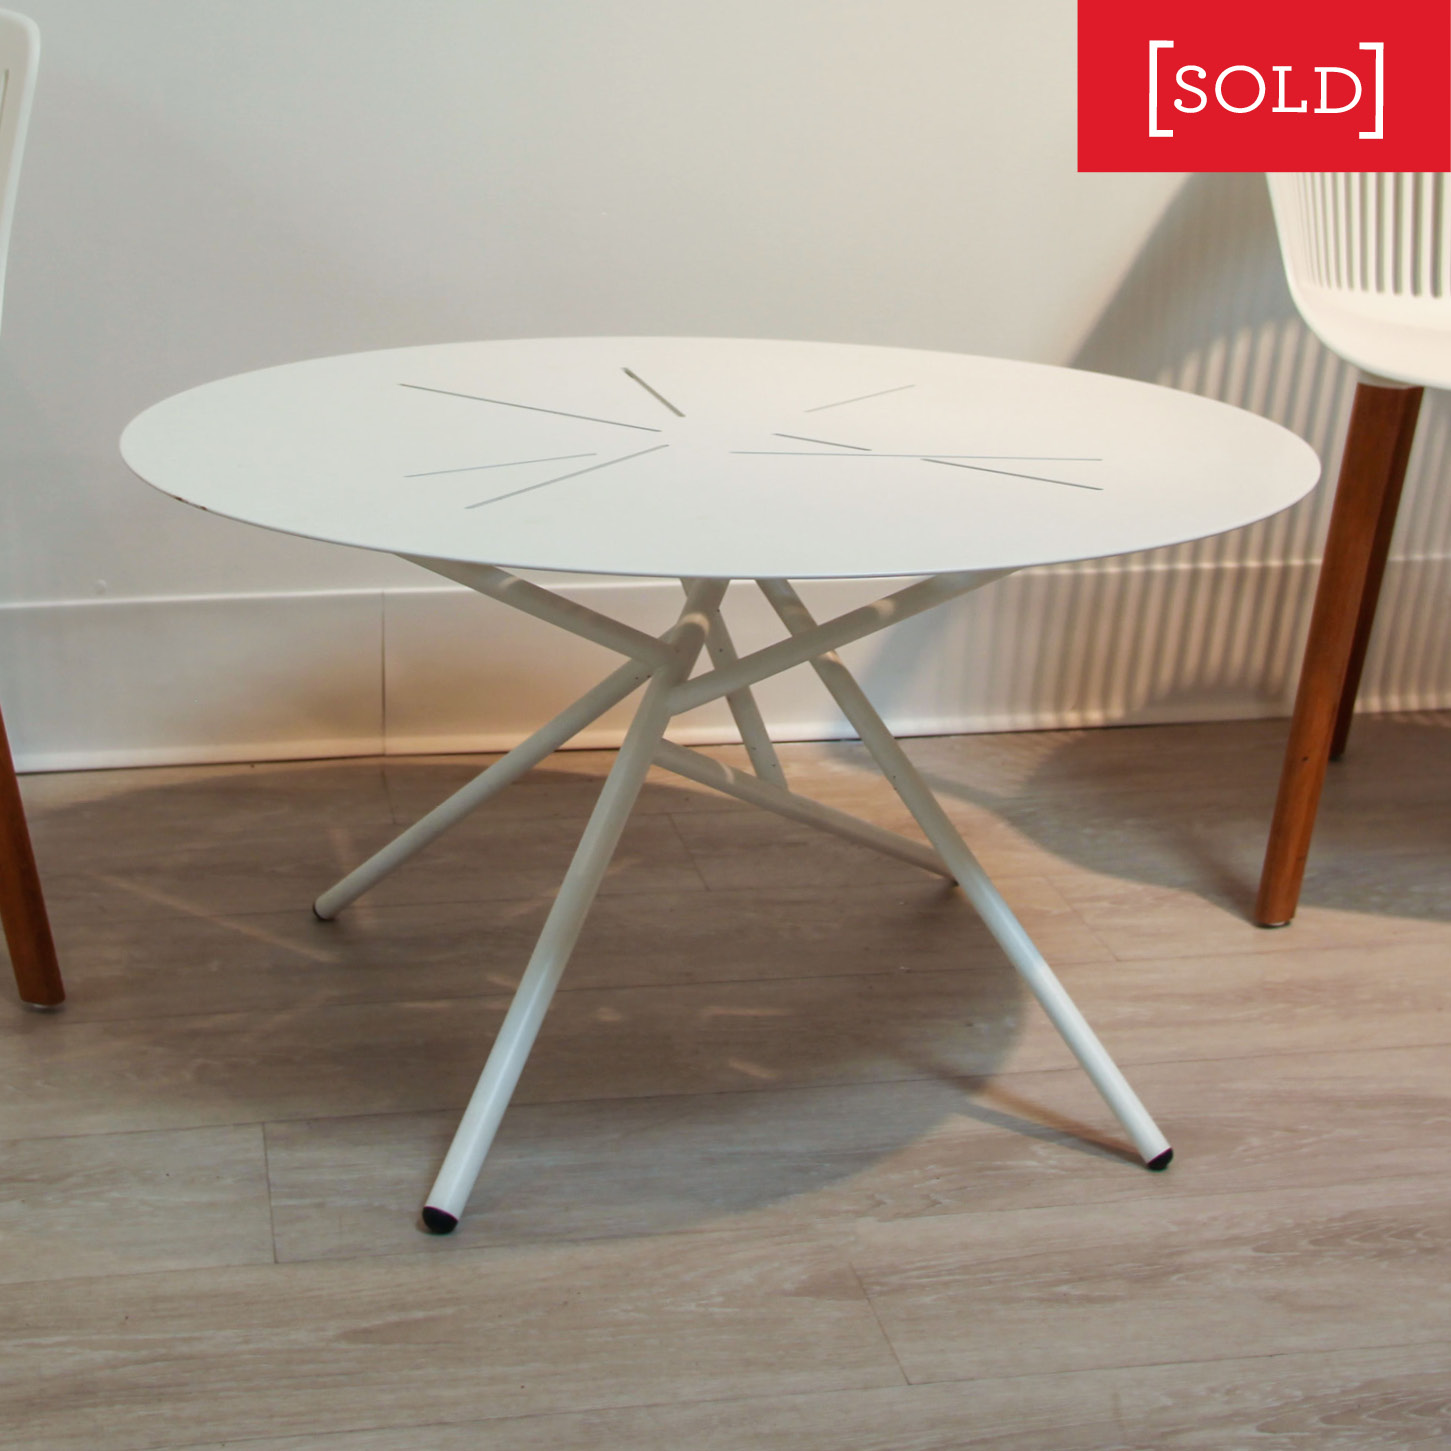 OutdoorTable-SOLD | Thrift Studio